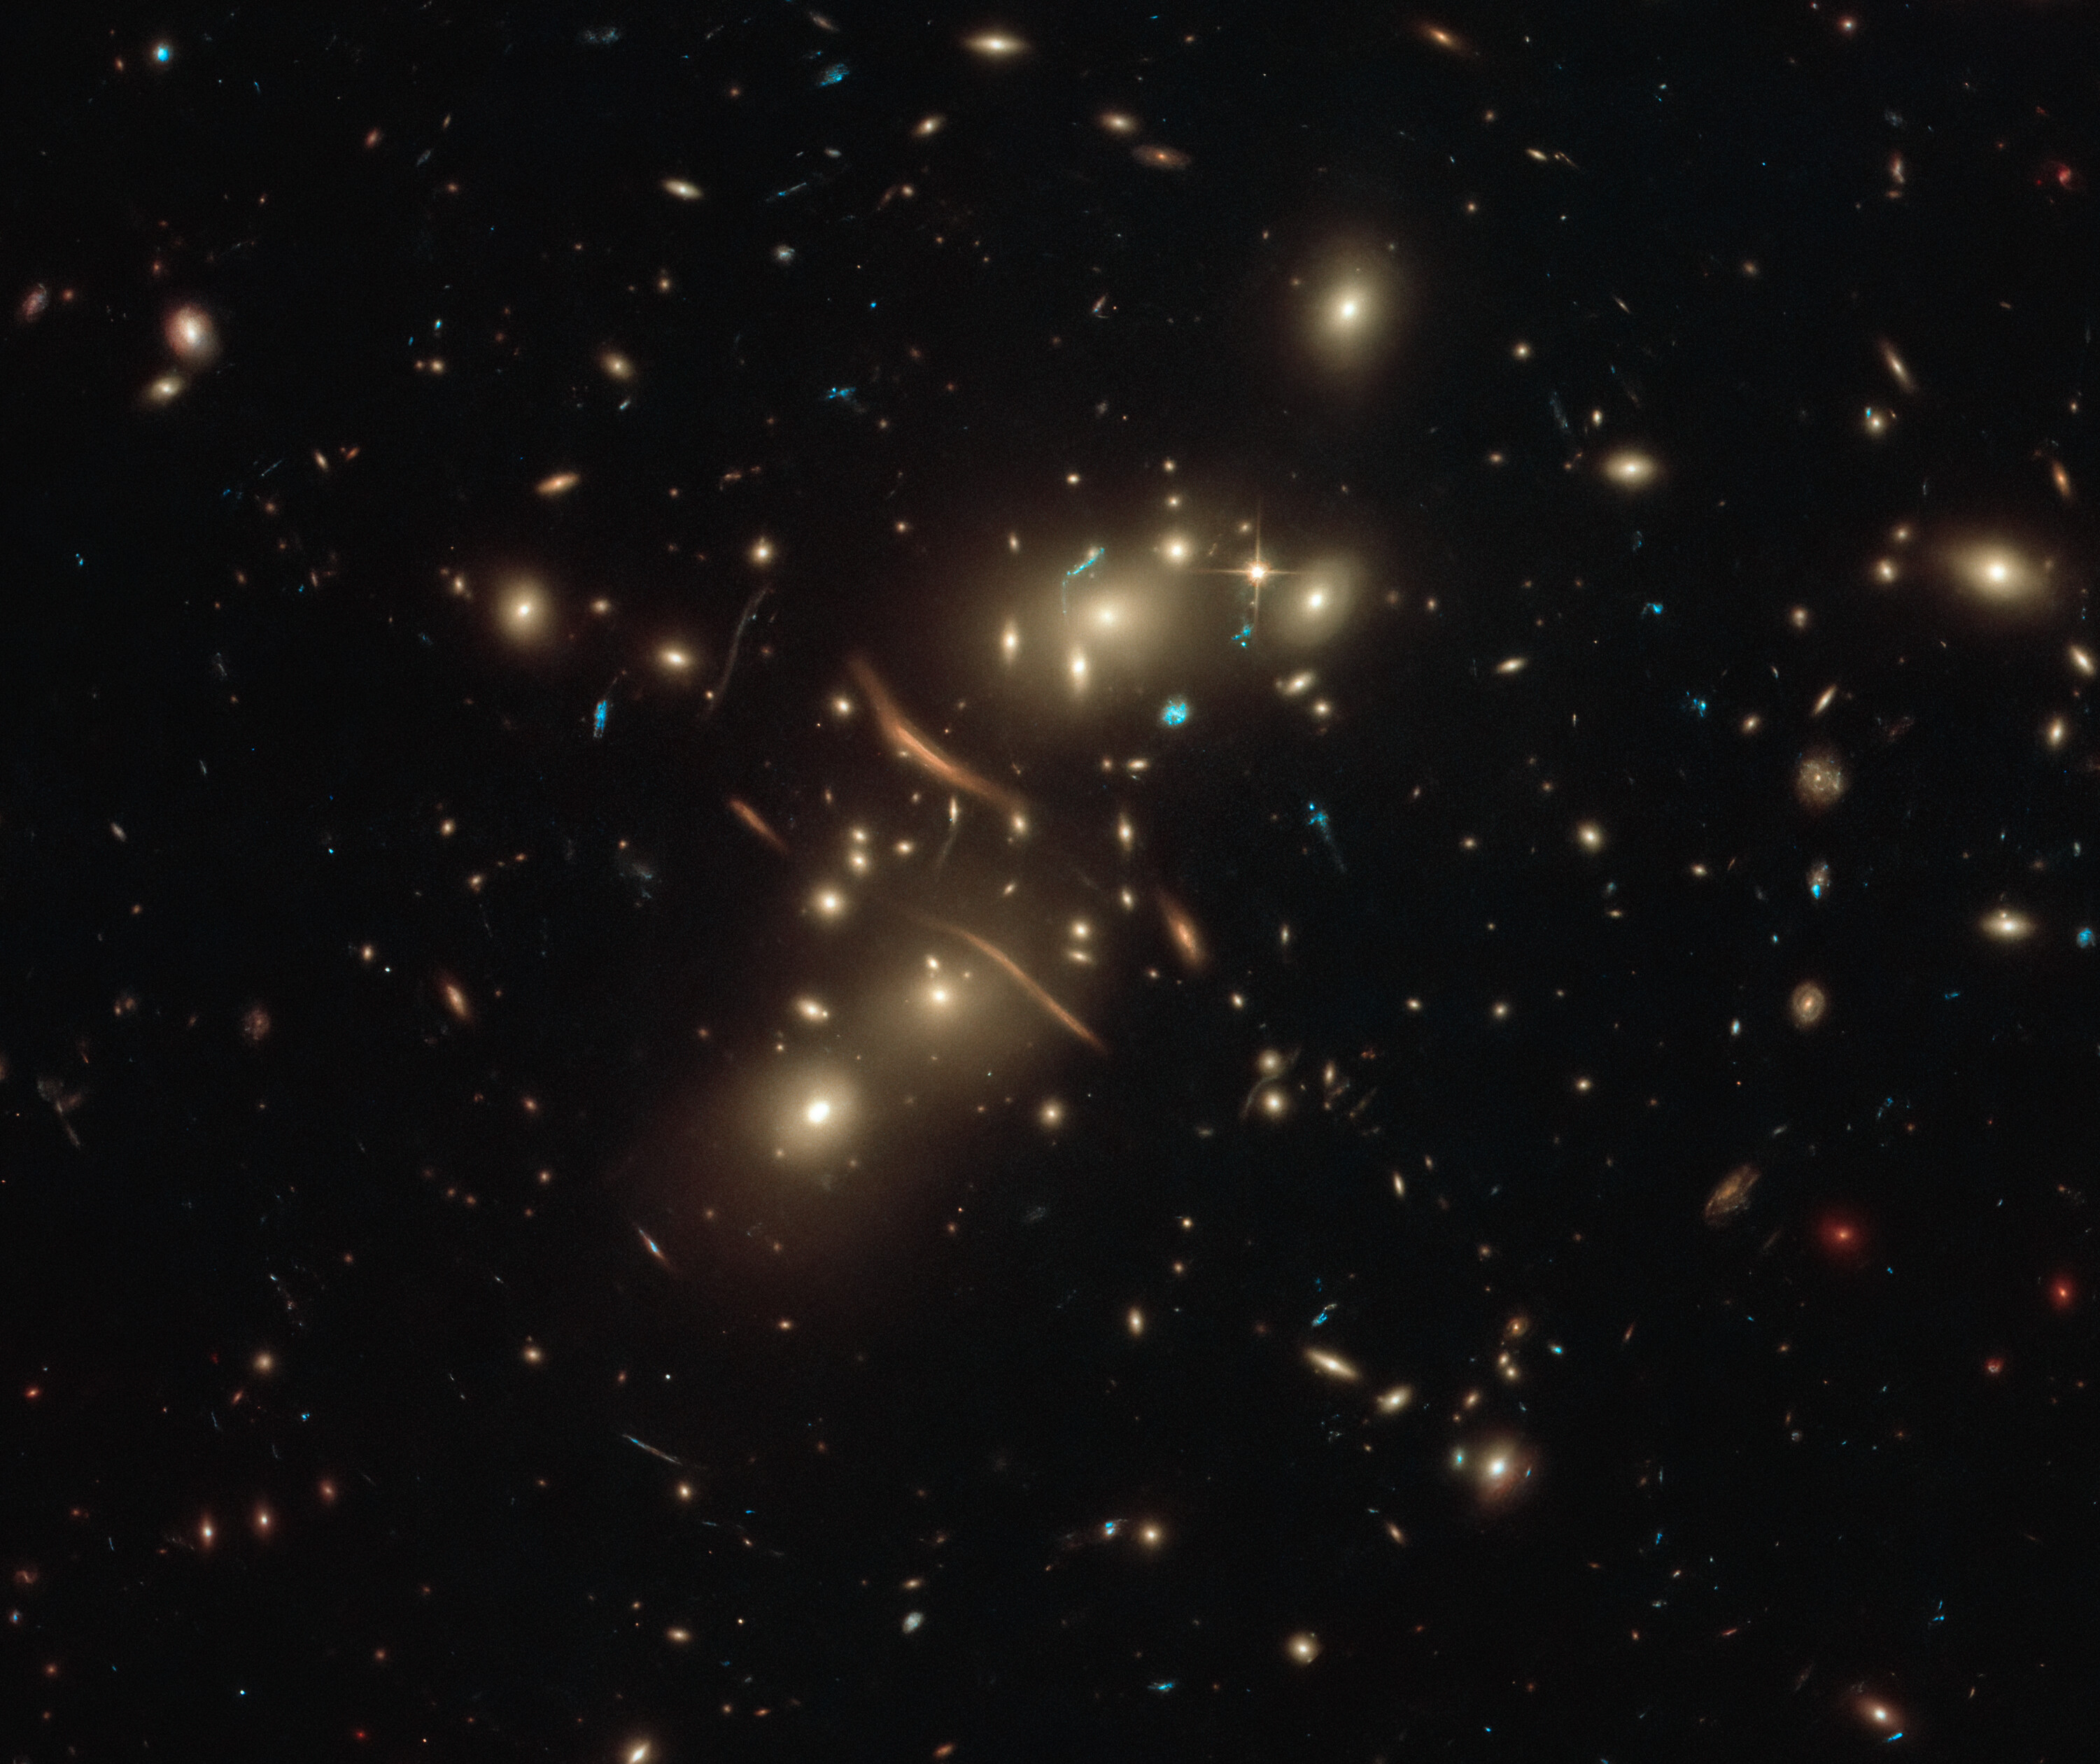 Black background is dotted with distant galaxies. Image center holds a cluster of galaxies, many of the appear to be large elliptical galaxies. Curved orange-yellow lines appear to cut through the galaxy cluster. These are more distant galaxies gravitationally lensed by the cluster.